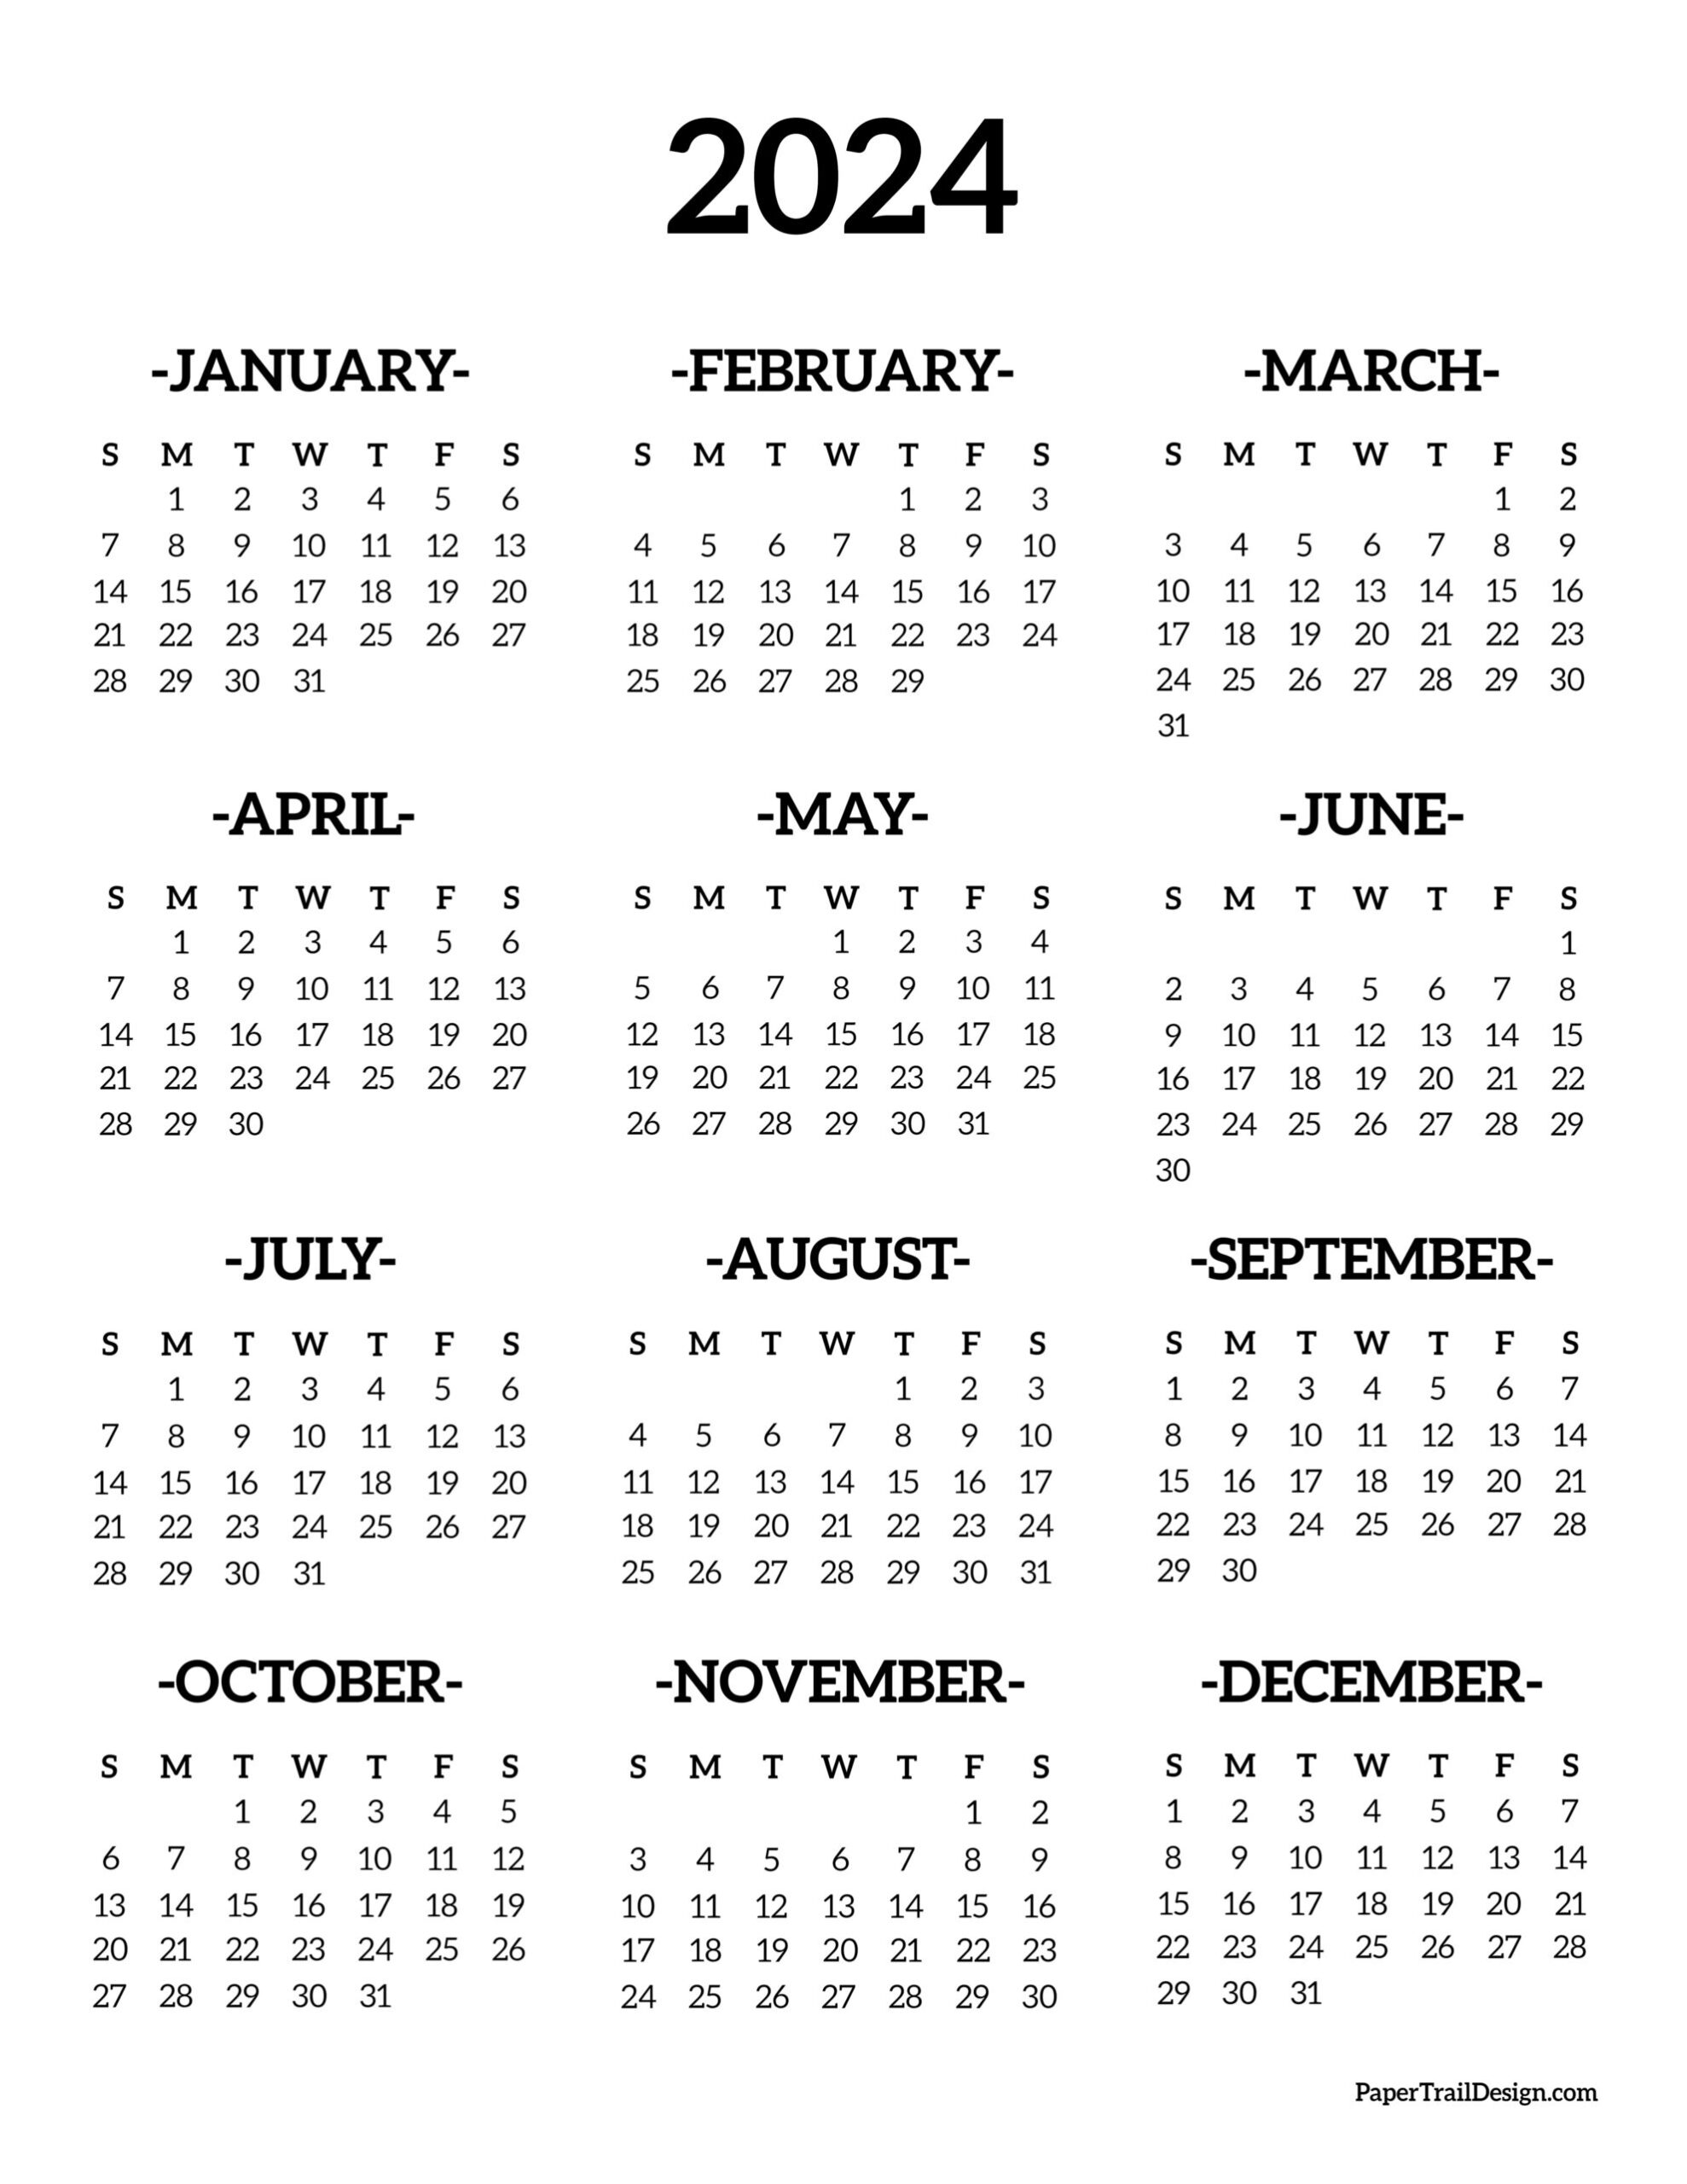 Calendar 2024 Printable One Page - Paper Trail Design | Free 2024 Printable Calendar One Page